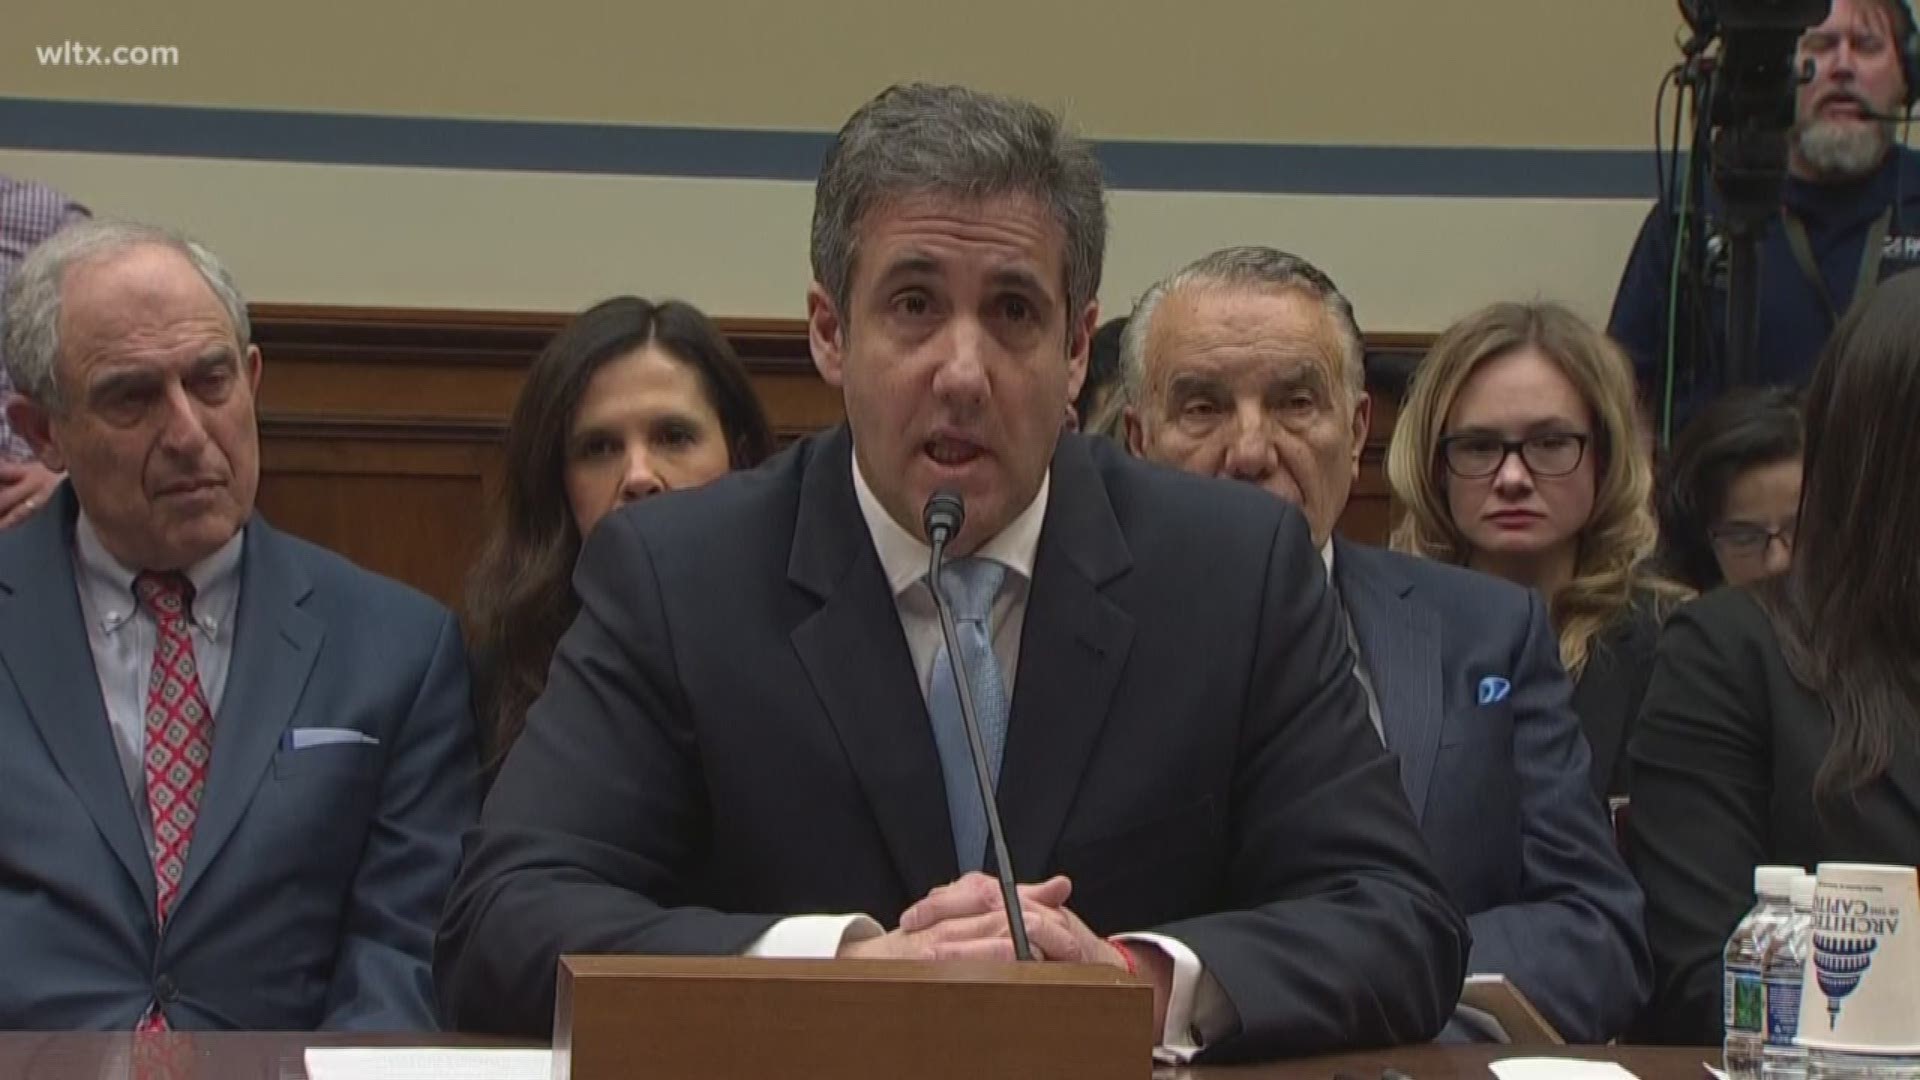 Michael Cohen, President Trump's former personal lawyer, testified before Congress on February 27, 2019. Her are his responses to questions from Rep. Elijah Cummings (D-Maryland).